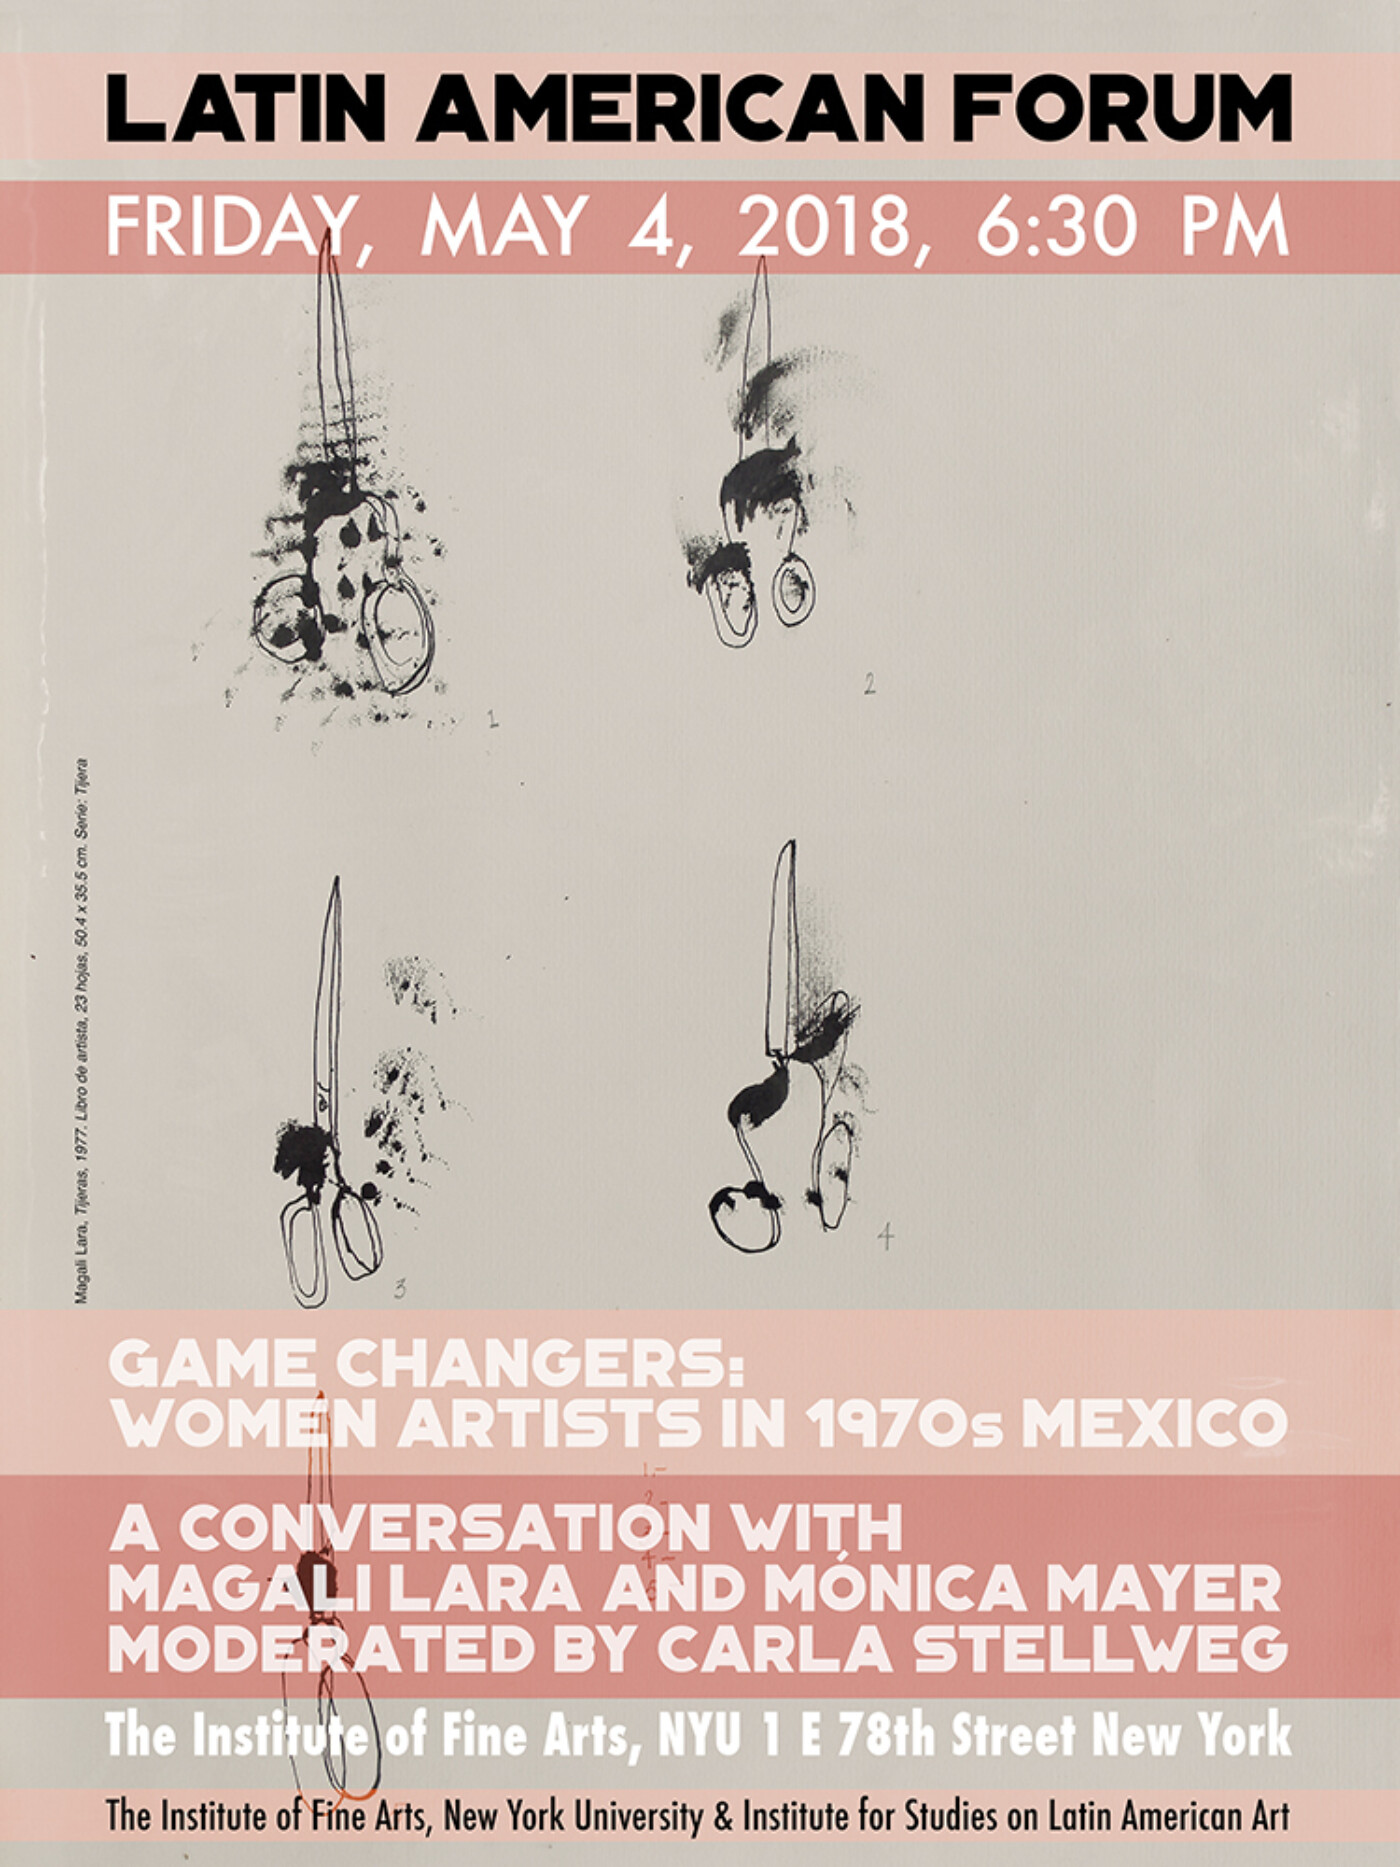 Five black ink illustrations of scissors with text describing Latin American Forum - Game Changers, May 4, 2018 event.